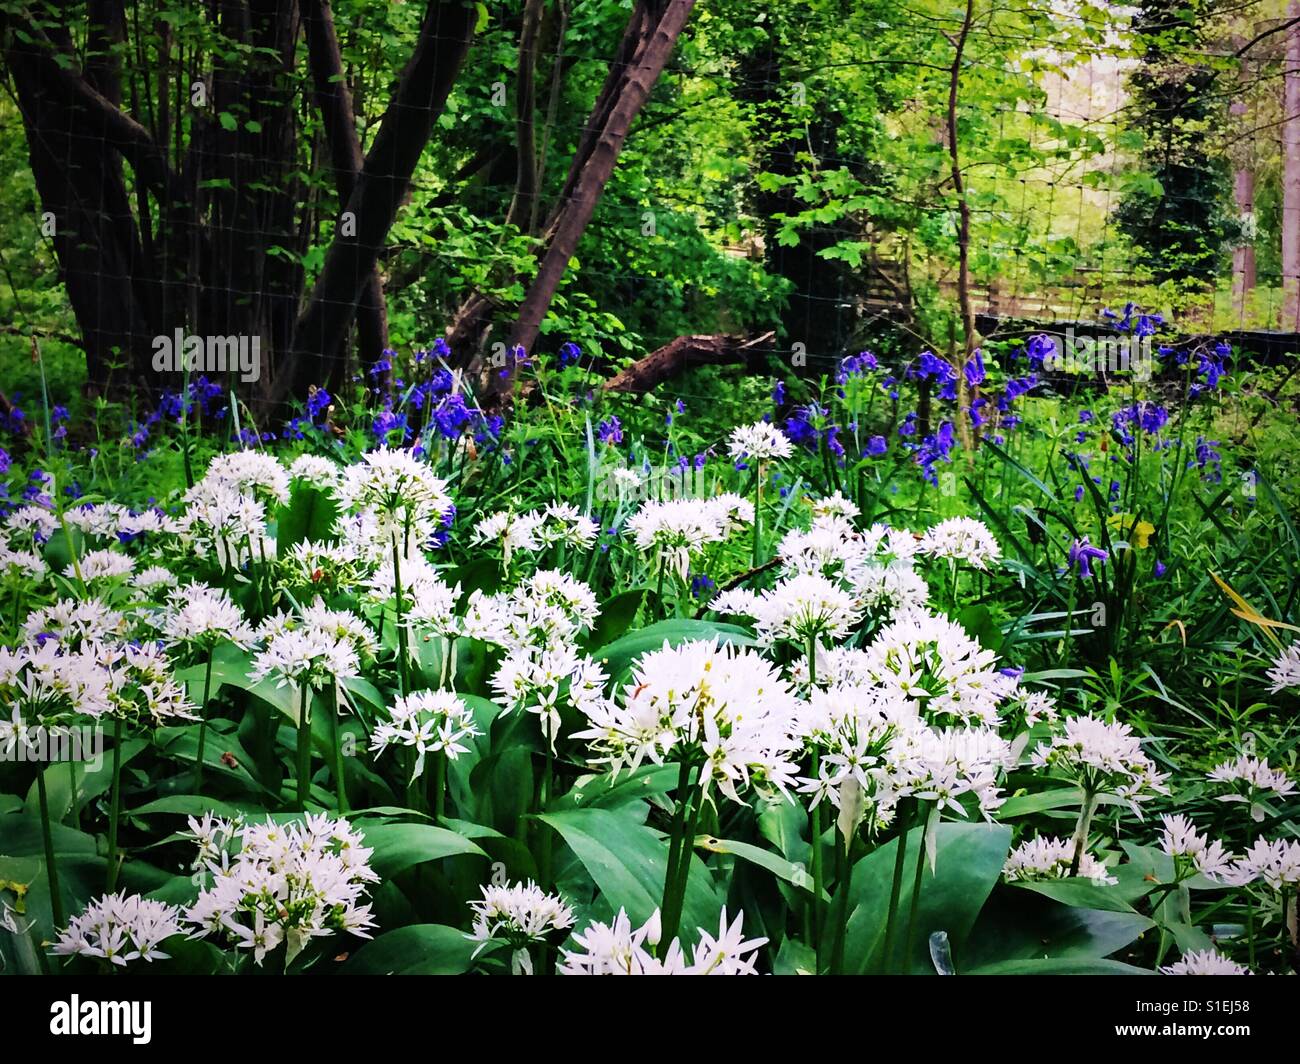 Field of bluebells and white spring flowers Stock Photo